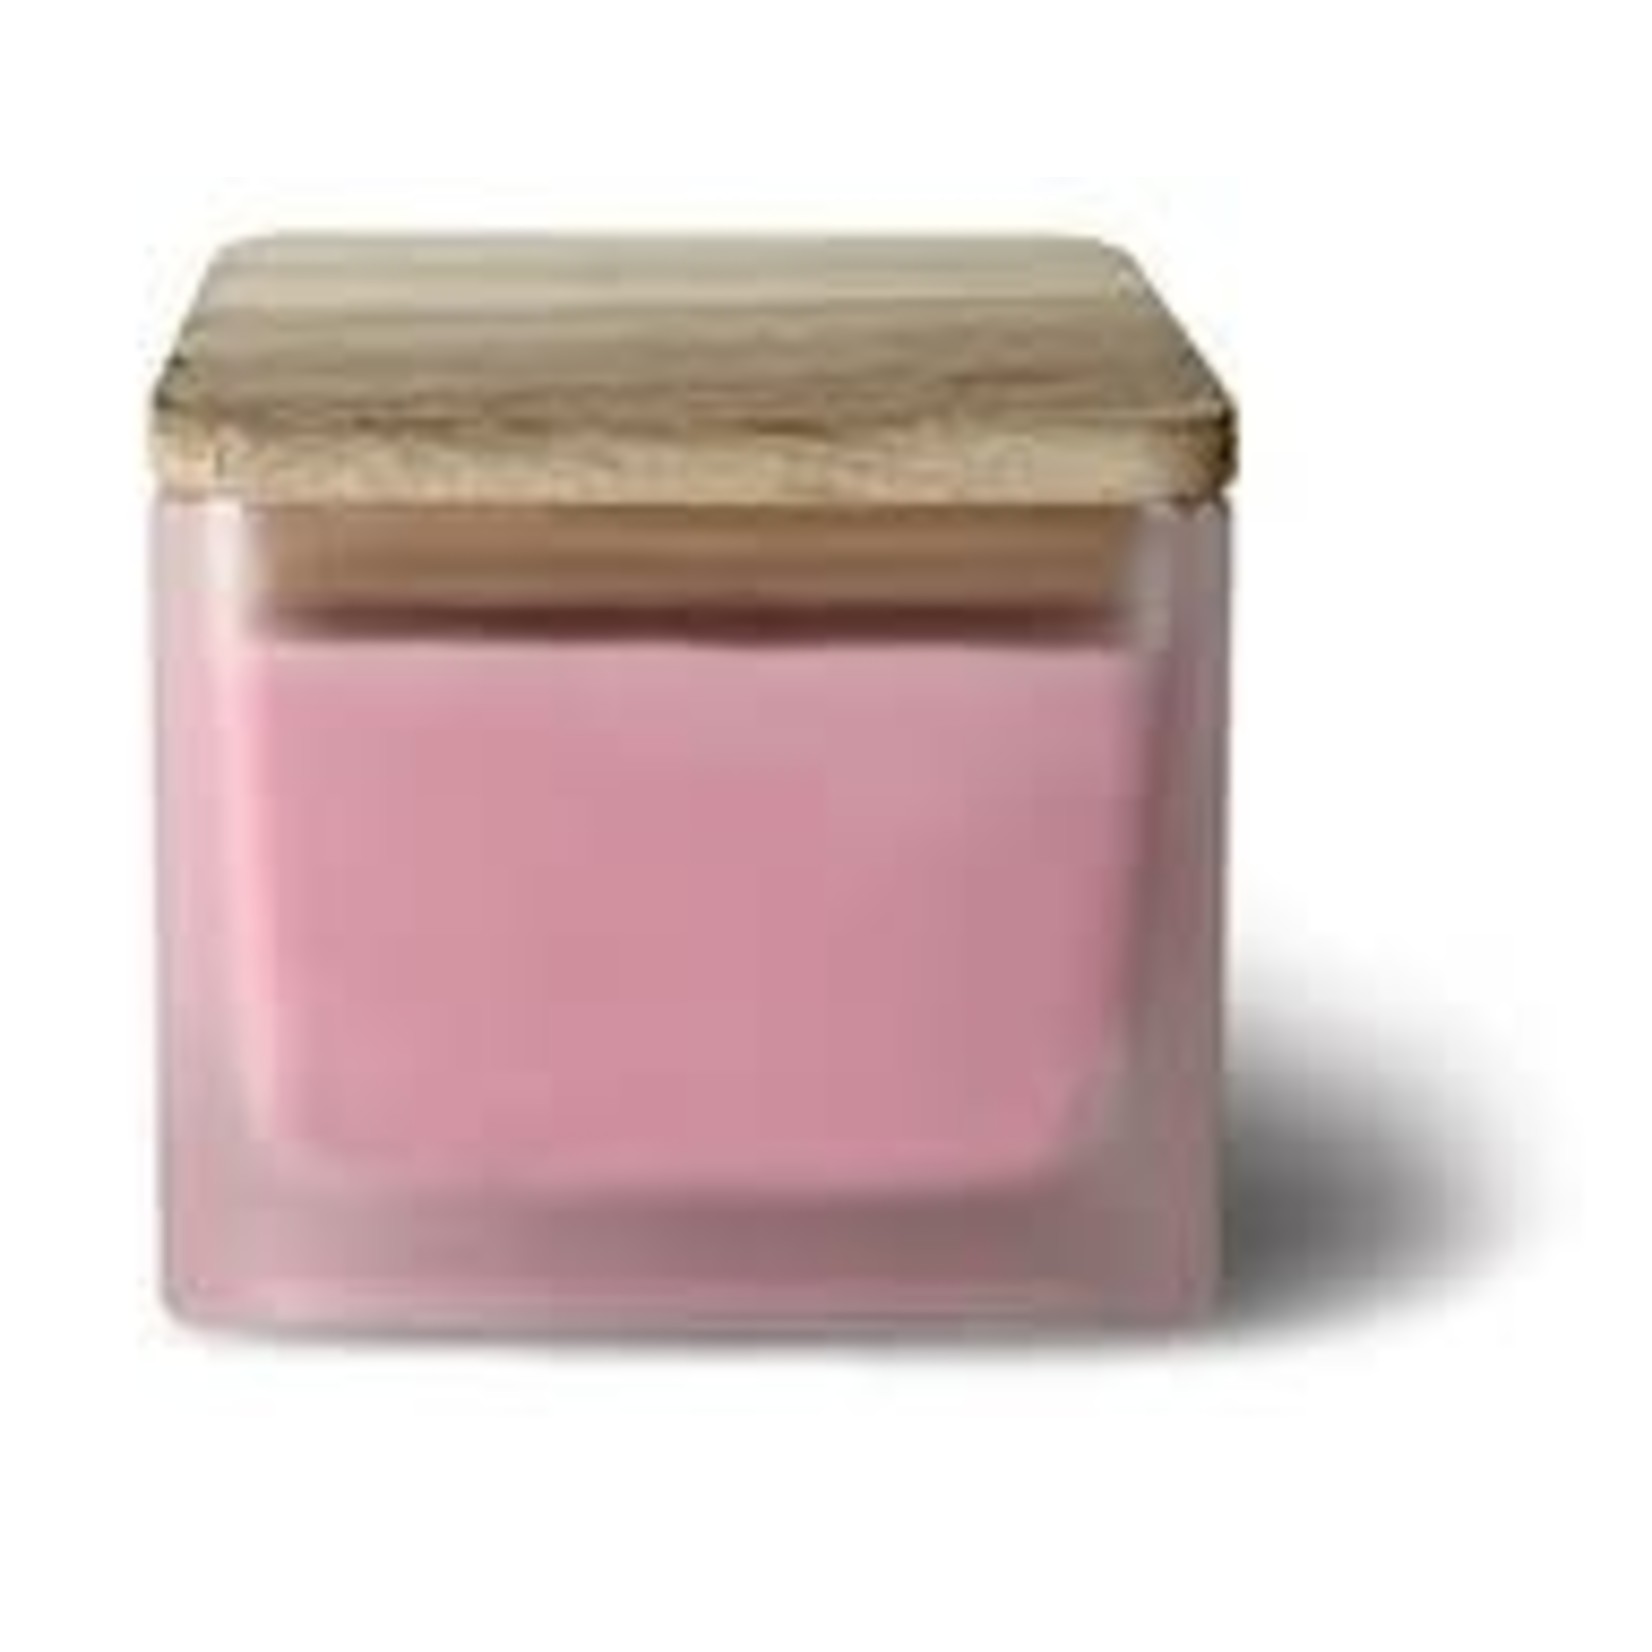 FROSTED GLASS SQUARE 14 oz CANDLE